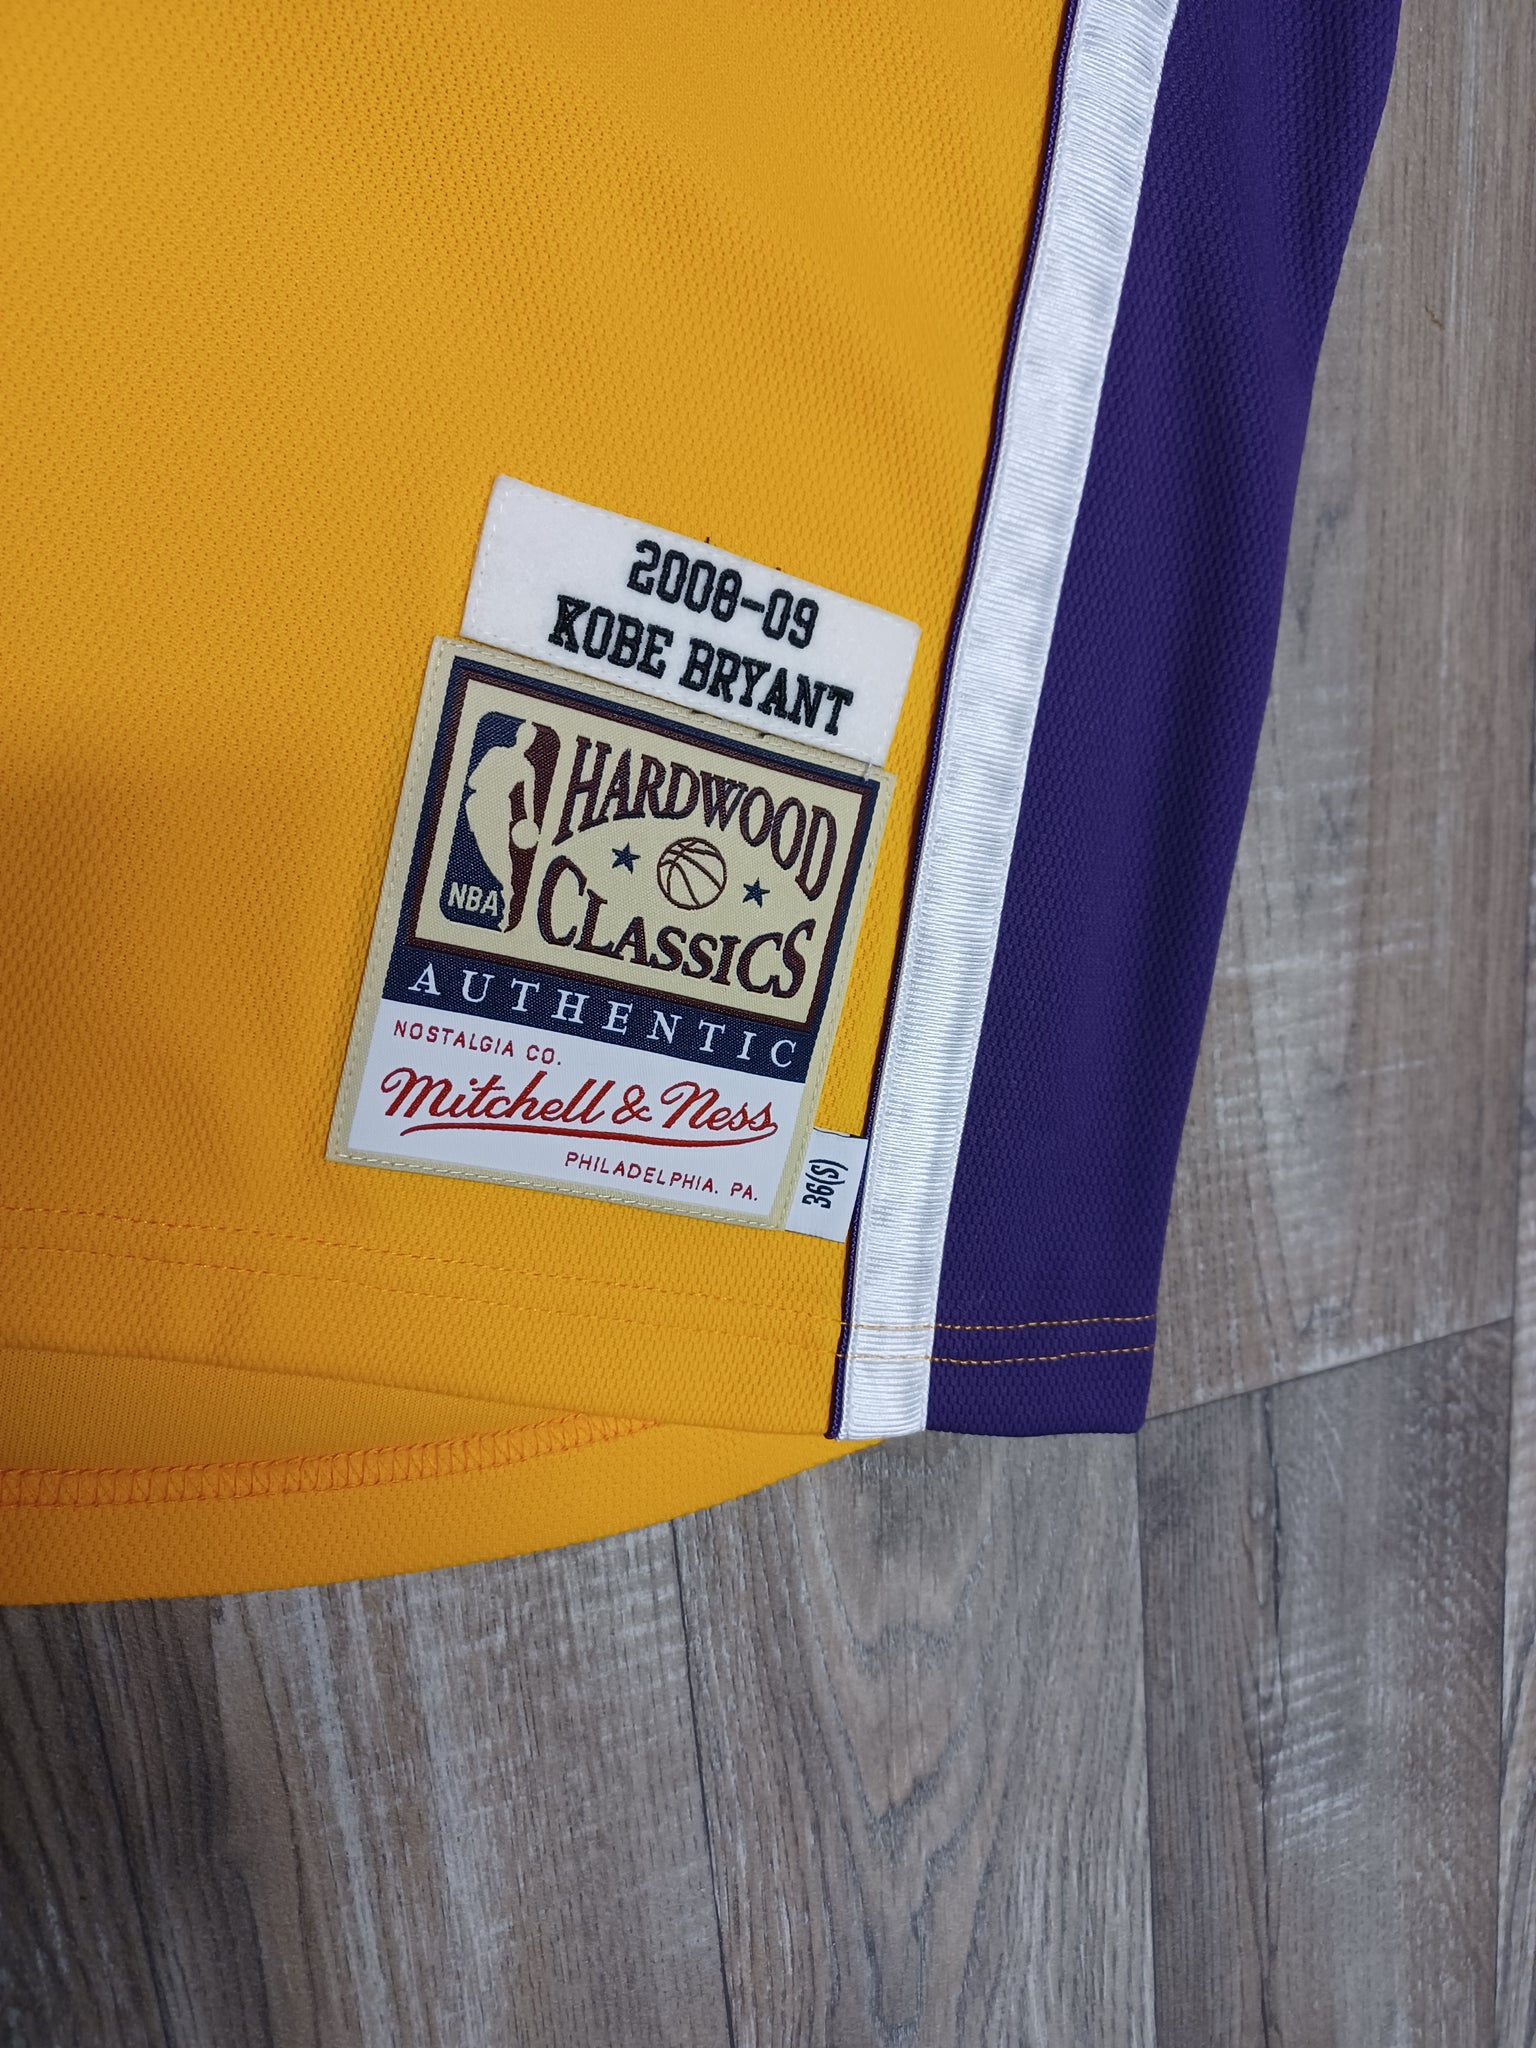 Mitchell And Ness Authentic Kobe Bryant Los Angeles Lakers NBA 2008-09  Jersey